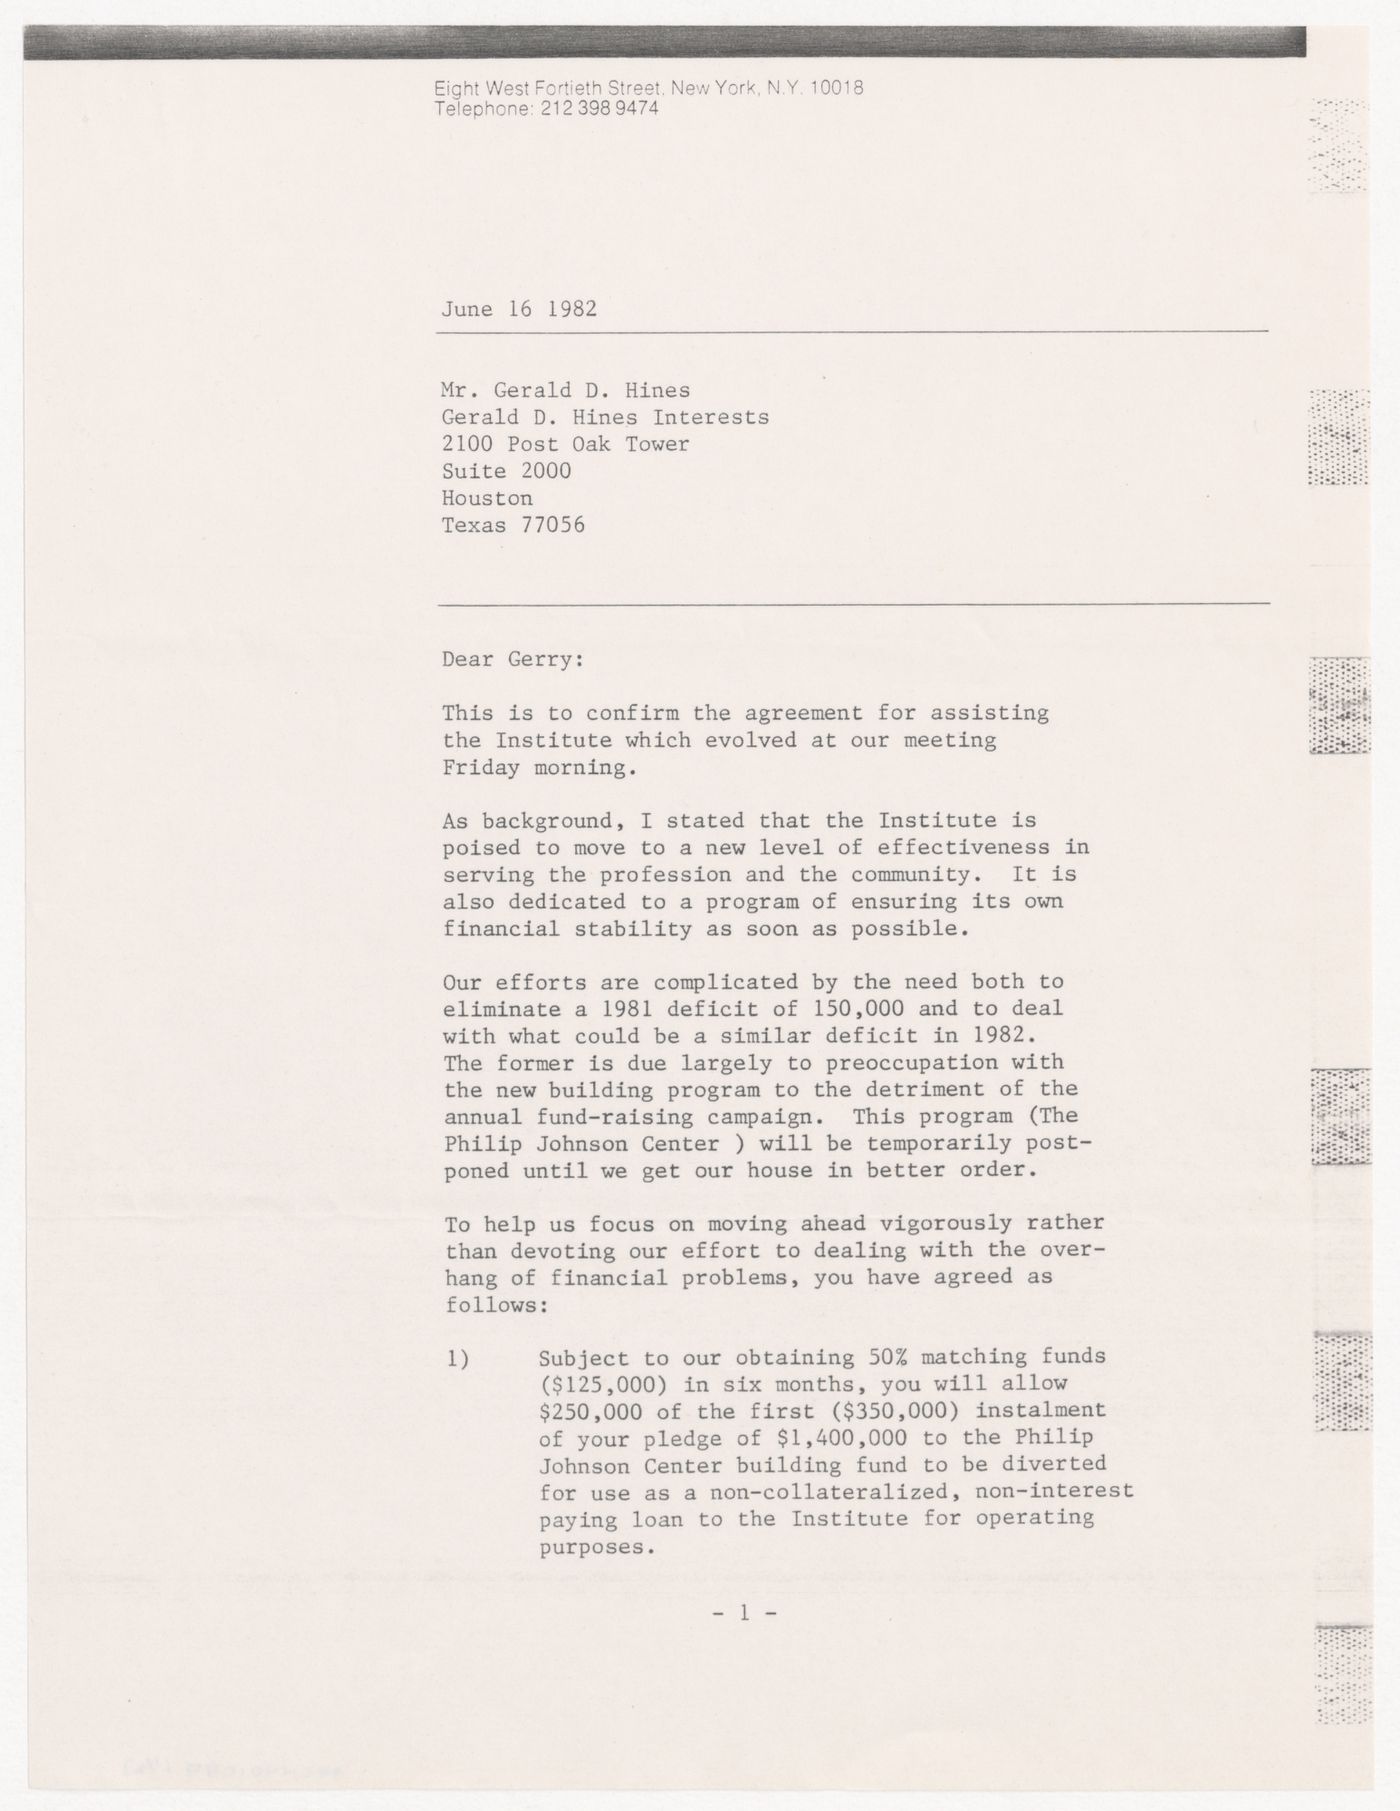 Letter from Edward L. Saxe to Gerald D. Hines about IAUS financial status